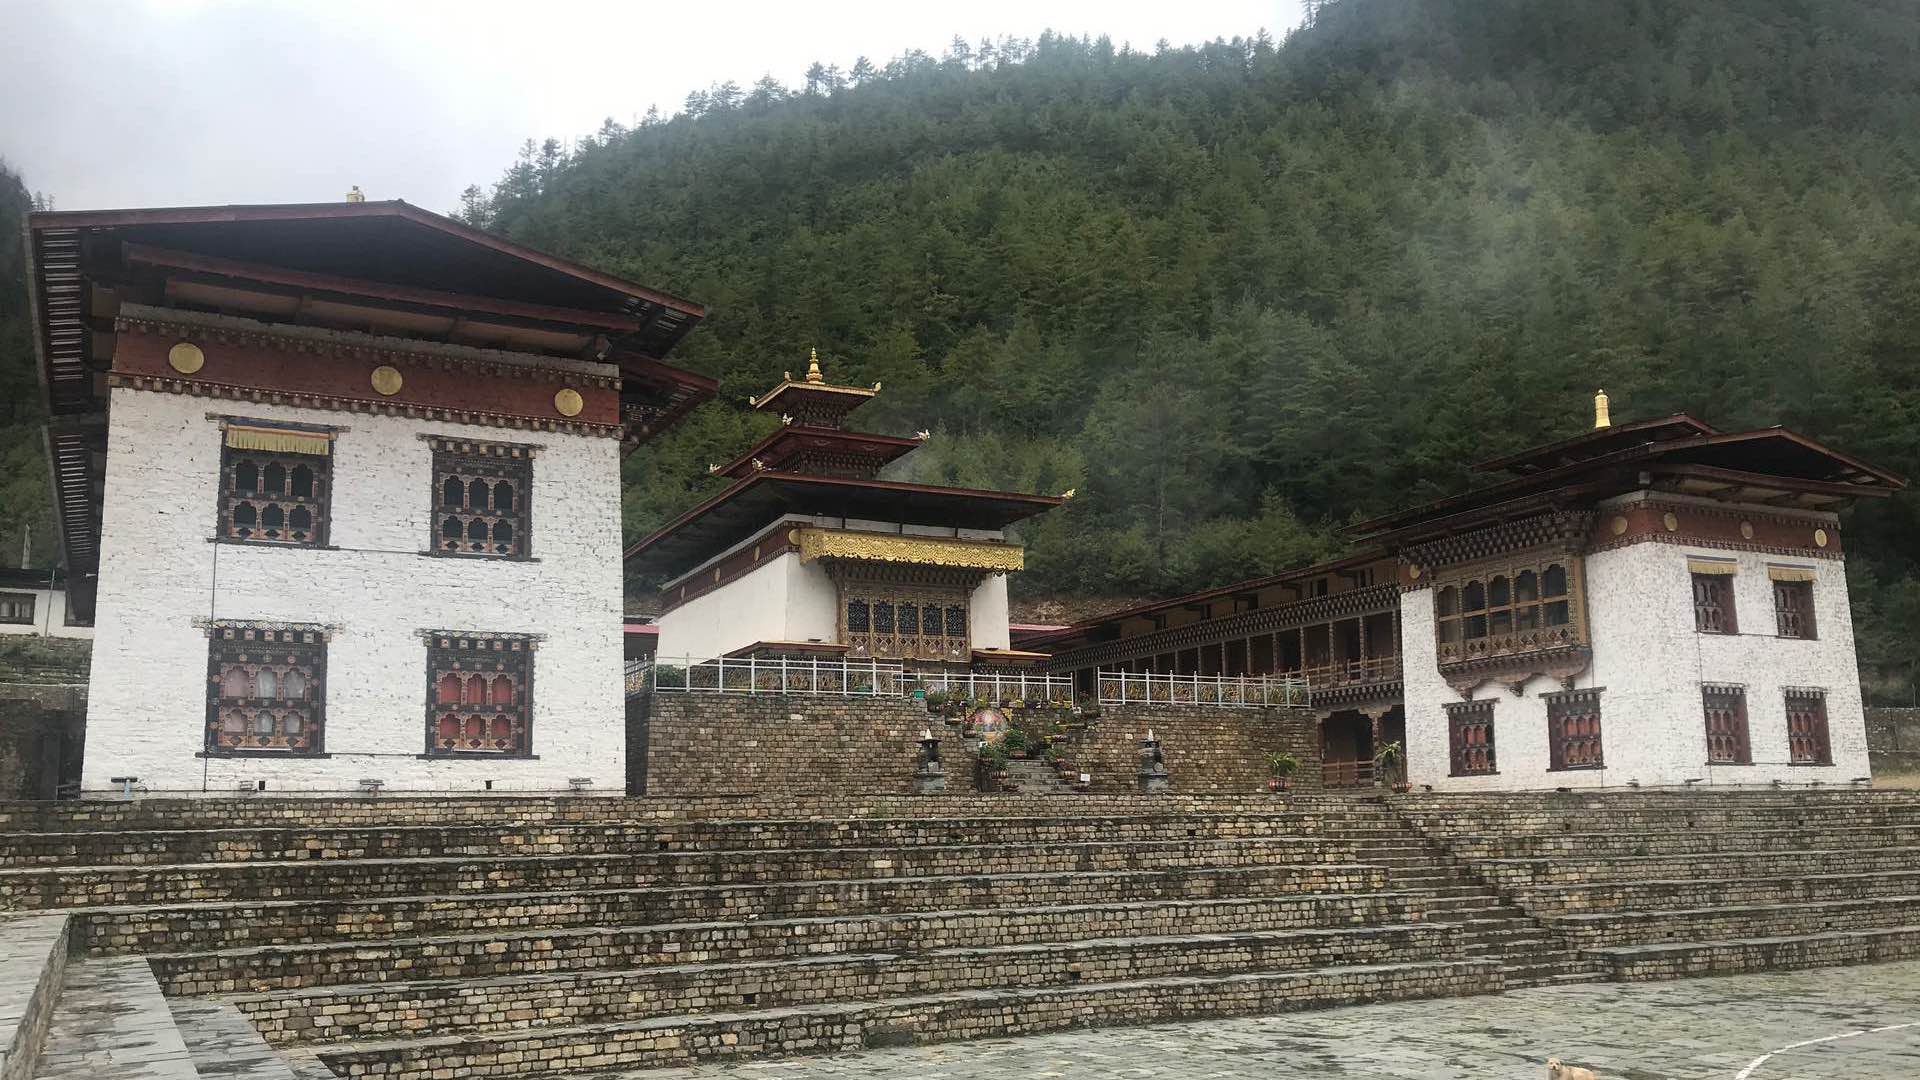 Lhakhang Karpo in Haa Valley